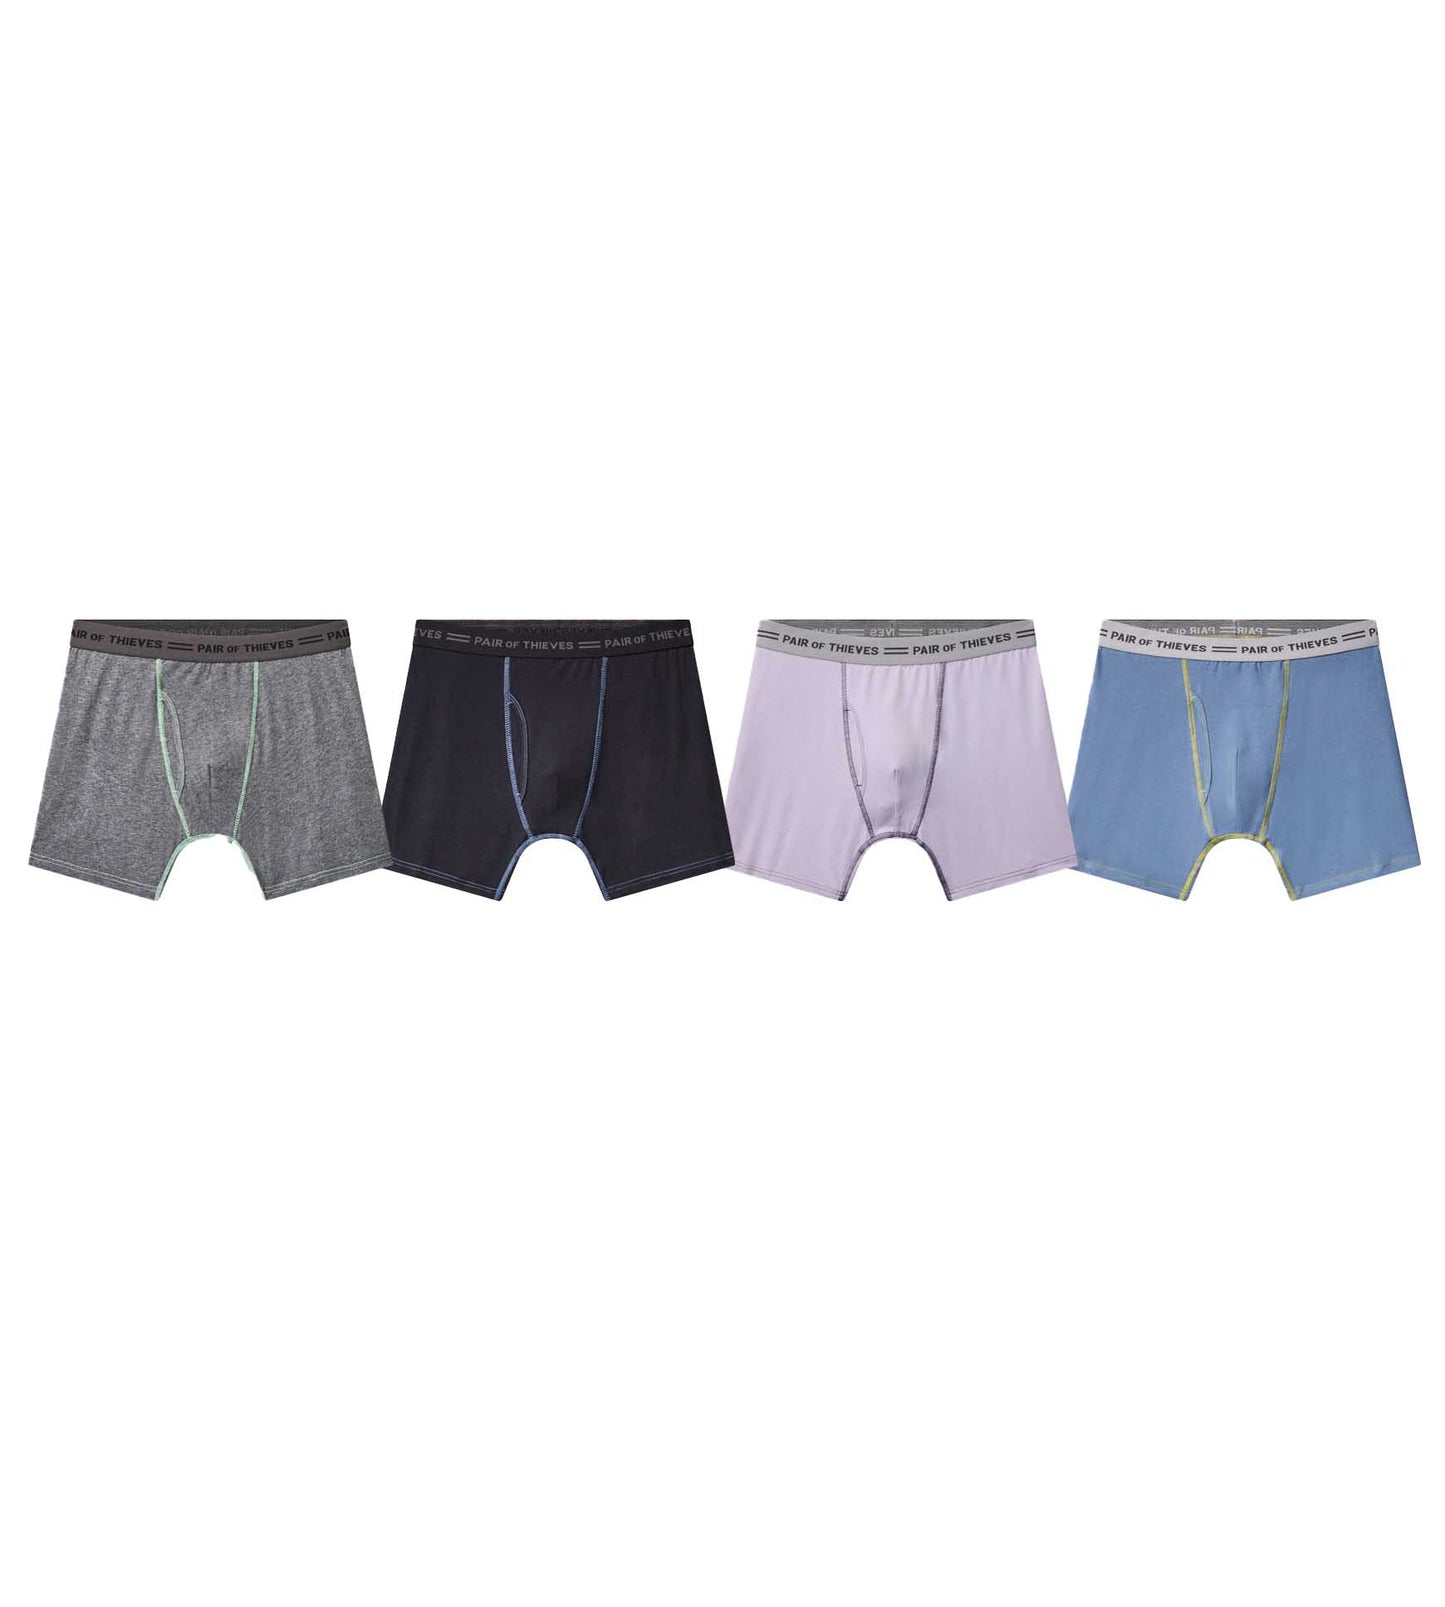 4-Way Stretch Every Day Kit Boxer Brief 4 Pack